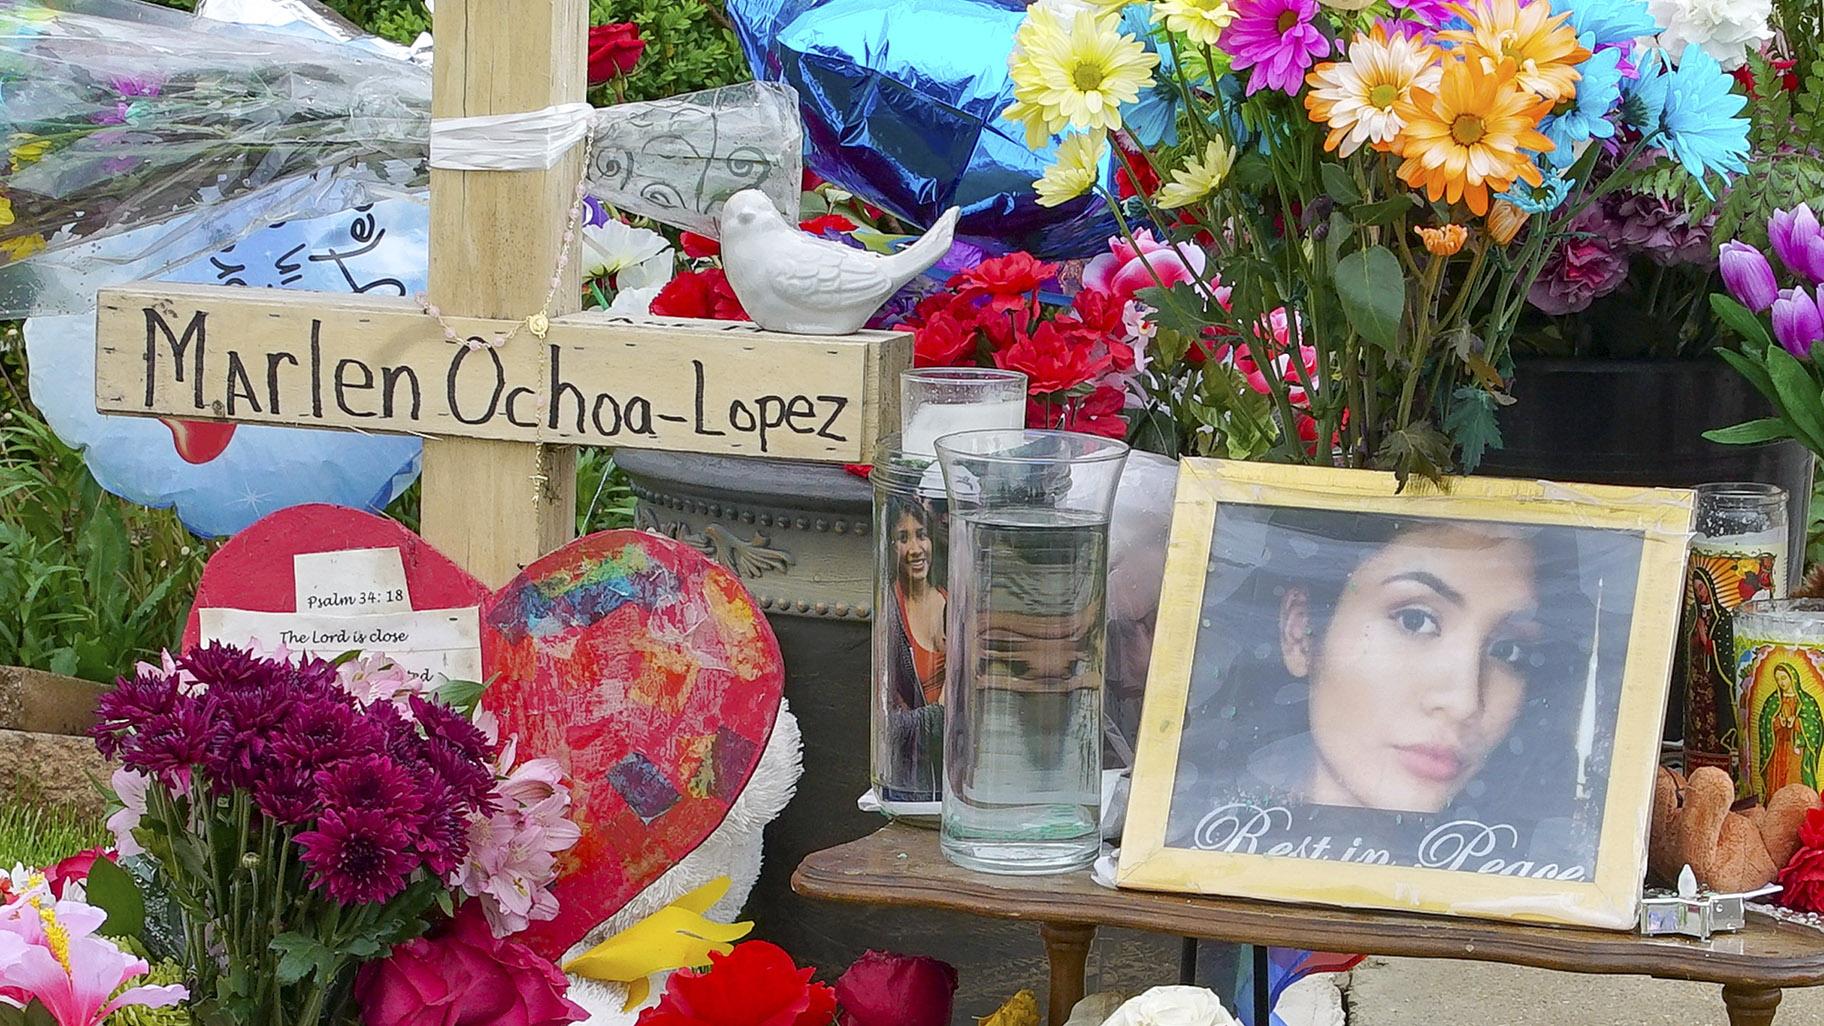 A memorial of flowers, balloons, a cross and photo of Marlen Ochoa-Lopez are displayed on the lawn, Friday, May 17, 2019 in Chicago, outside the home where Ochoa-Lopez was murdered last month. (AP Photo / Teresa Crawford)